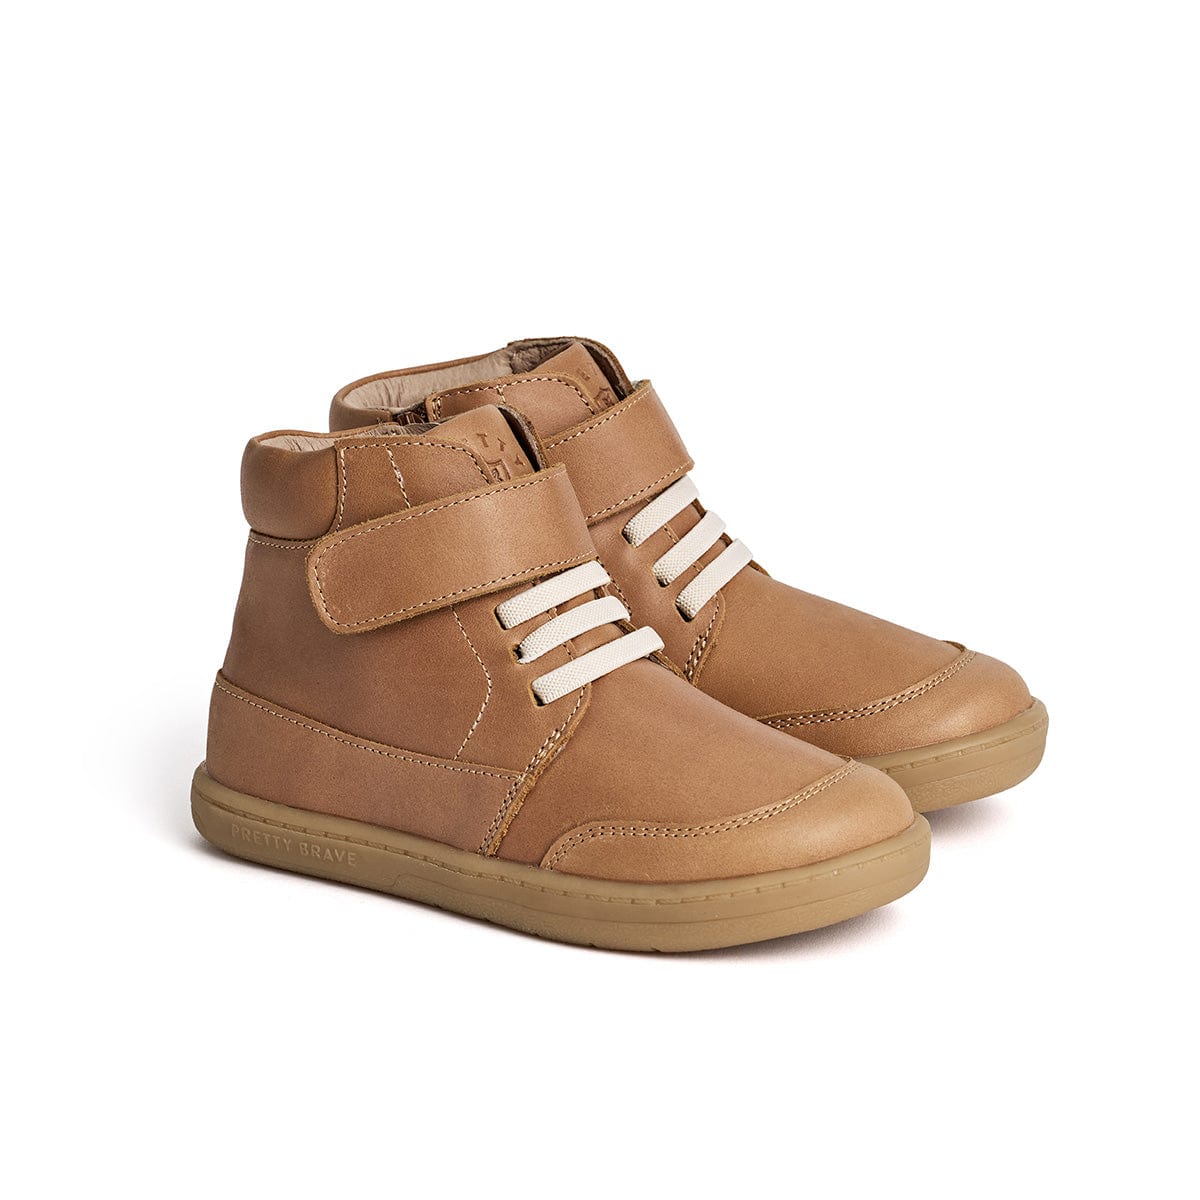 Pretty Brave Boys Shoes Harley Boot in Tan